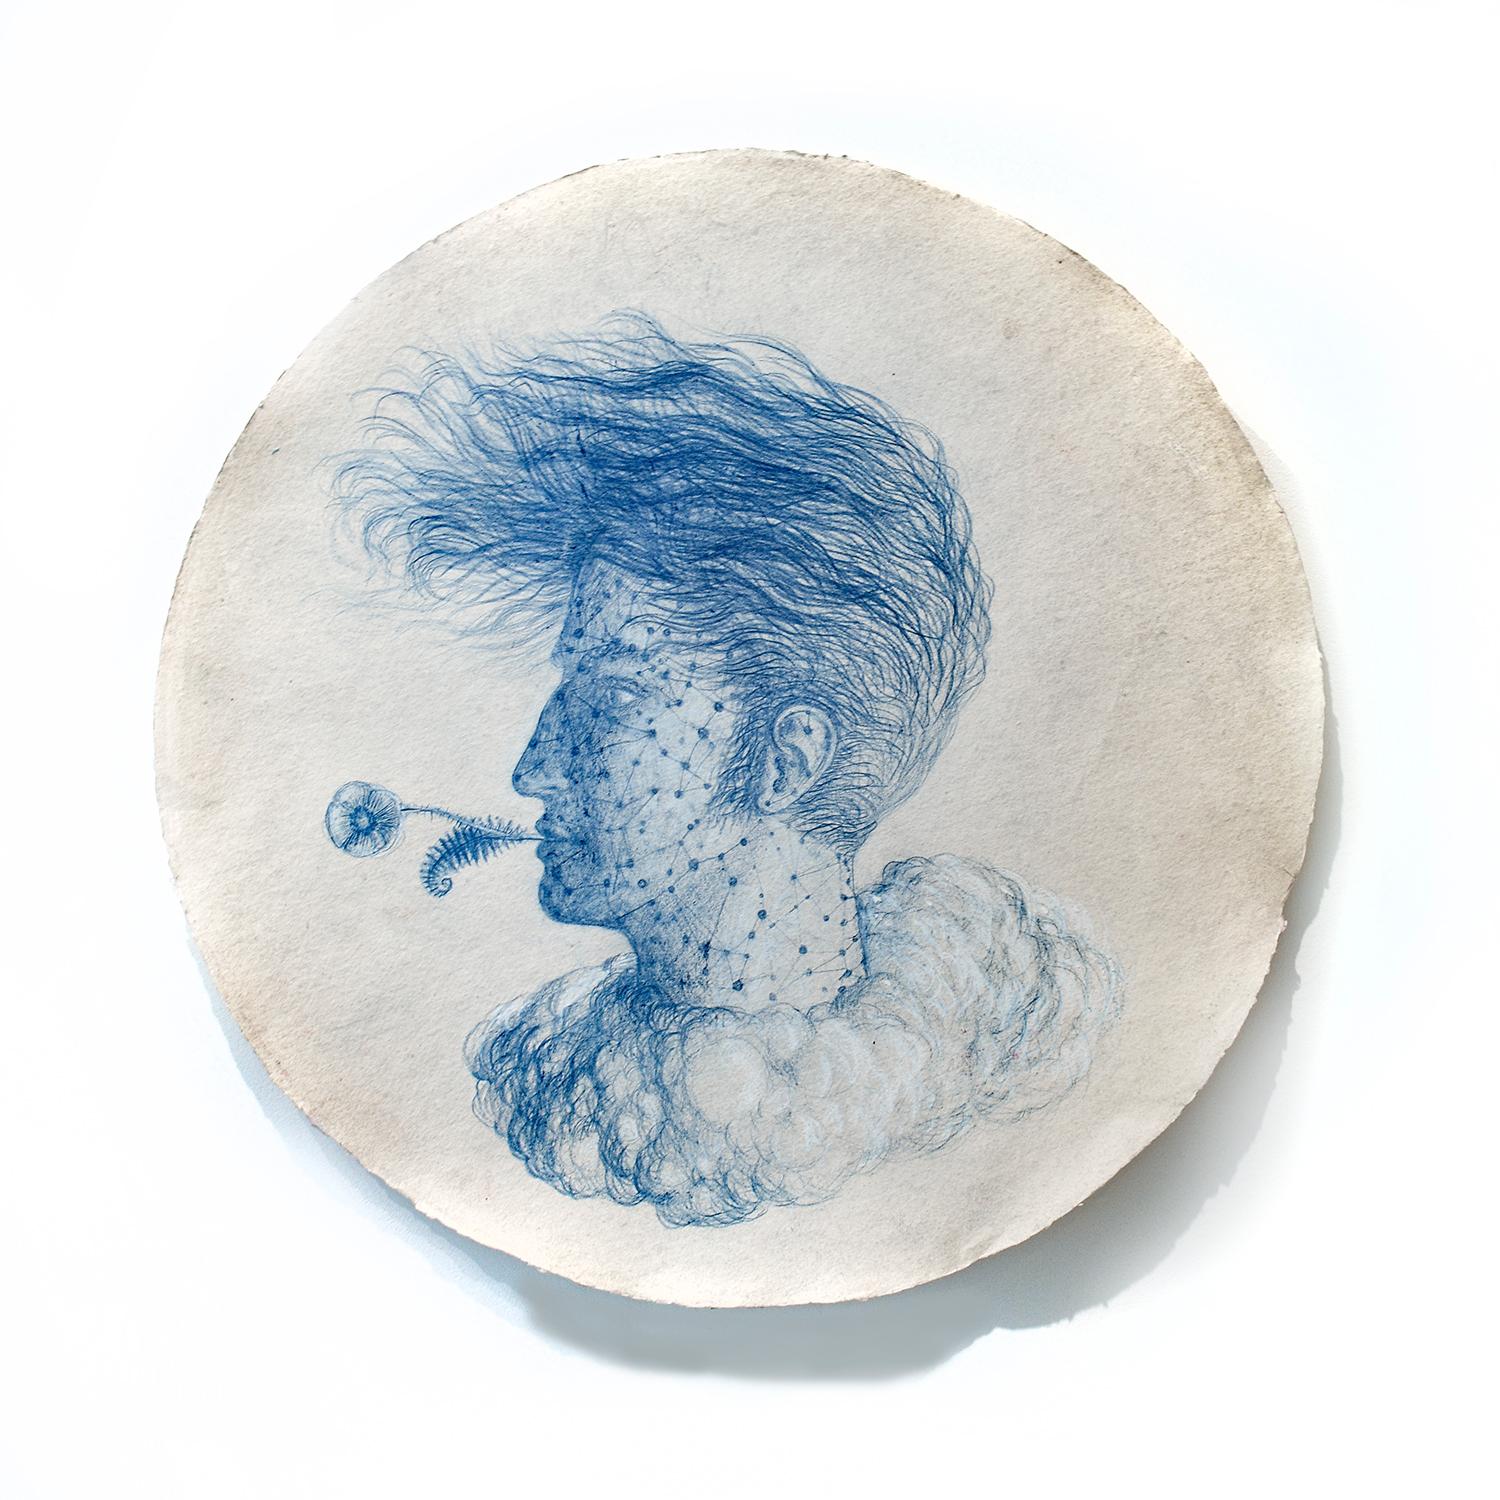 Poet's Augury (Round Portrait Drawing in Blue Pastel by Kahn & Selesnick)